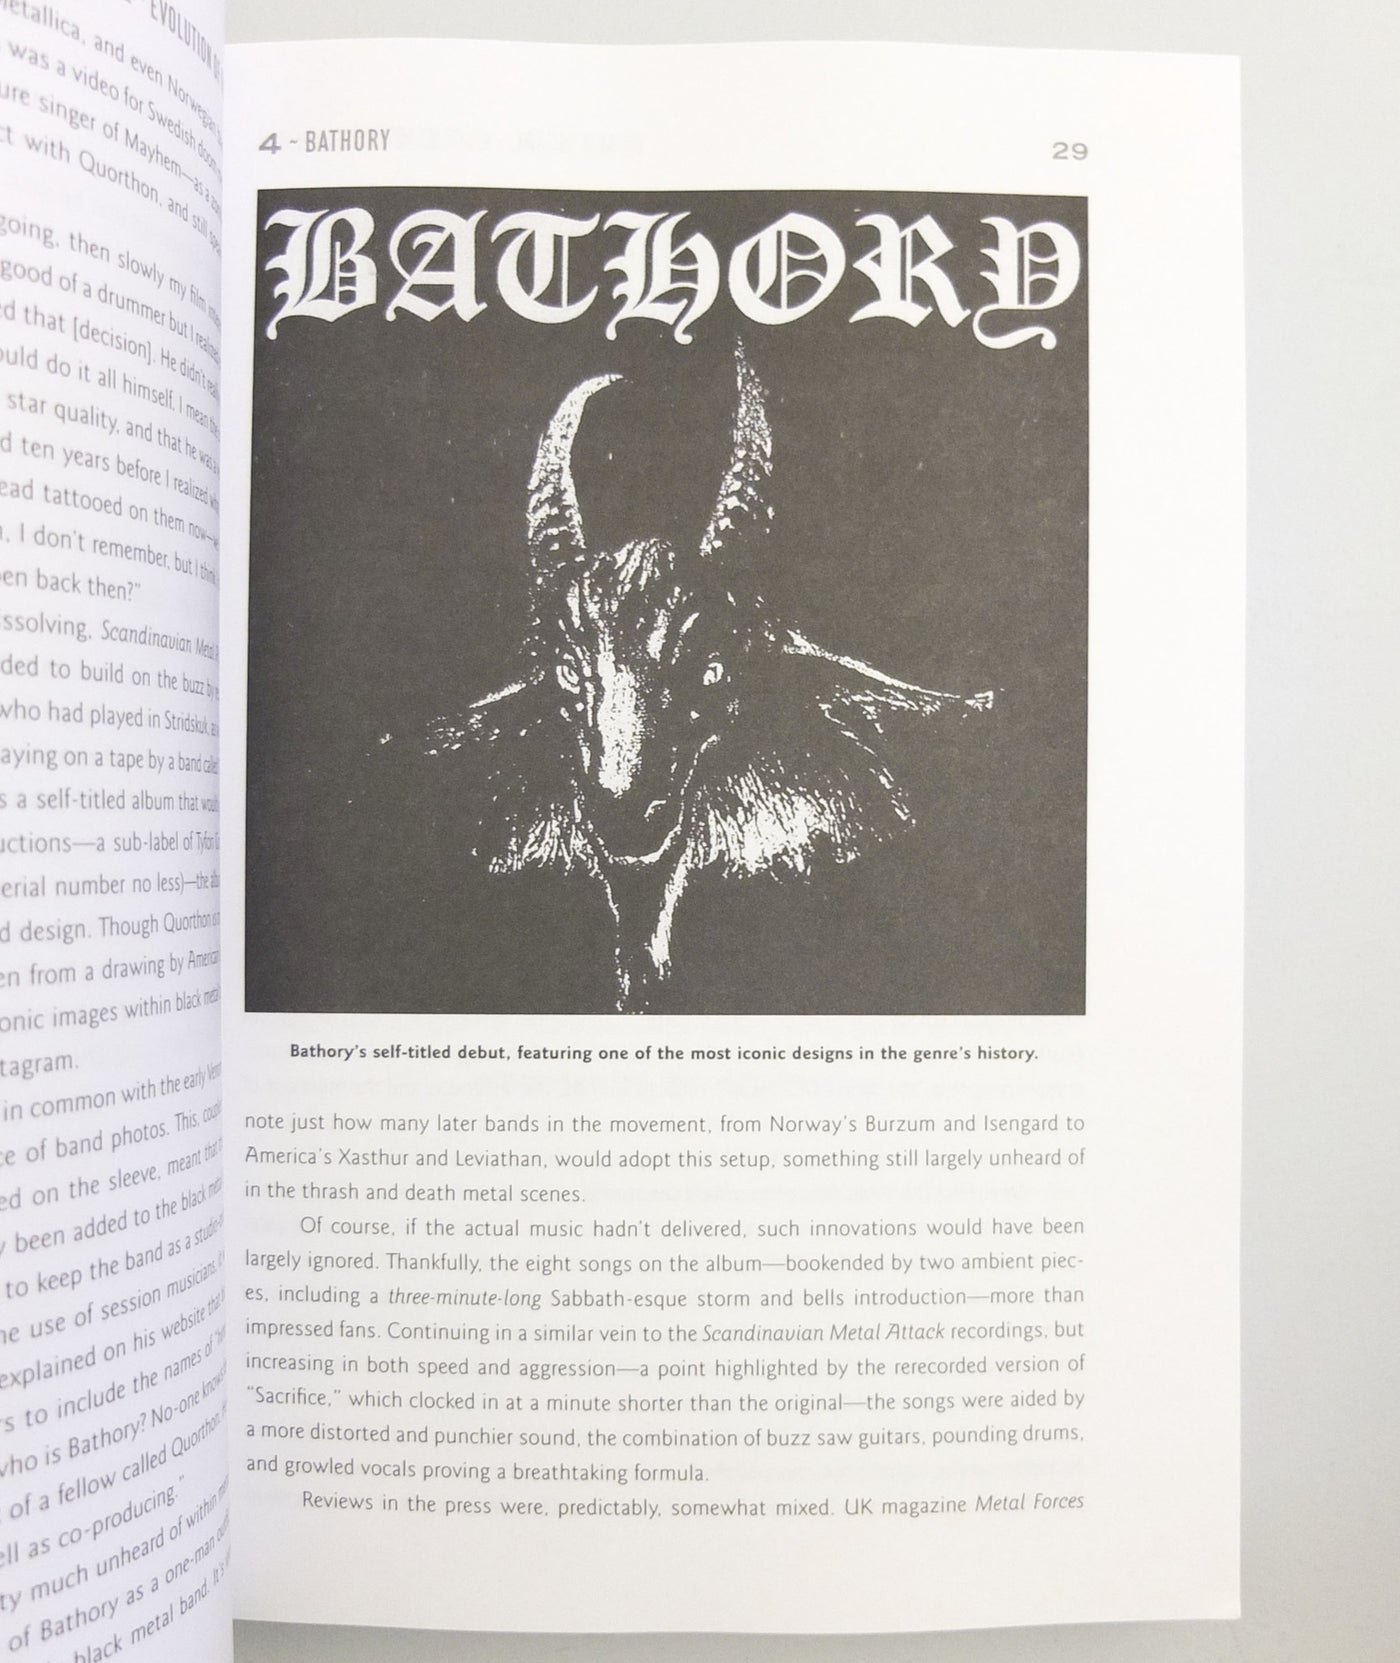 Black Metal : Evolution of the Cult by Dayal Patterson}